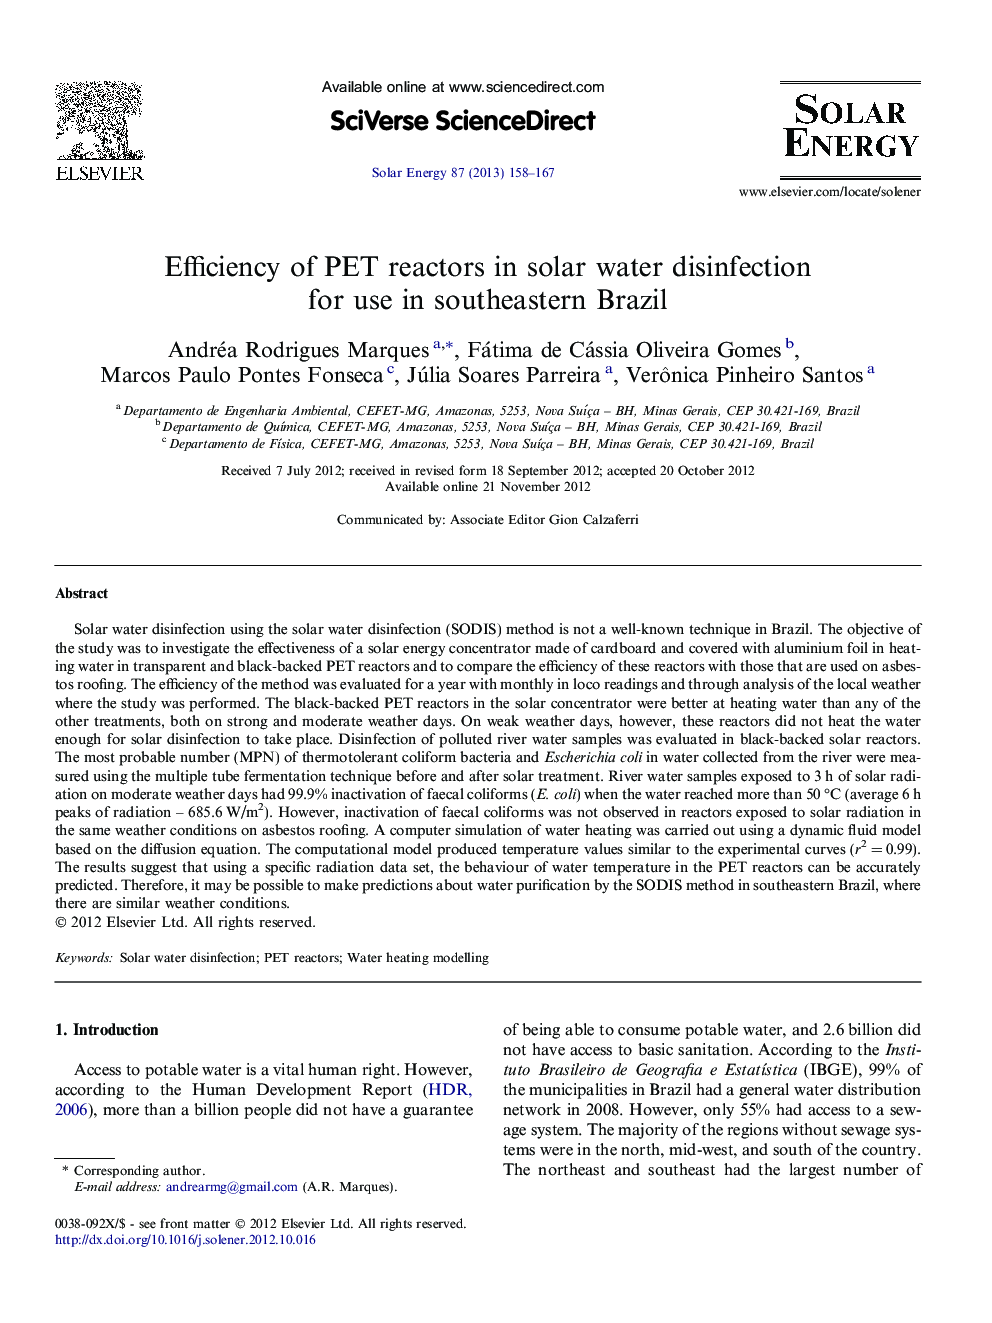 Efficiency of PET reactors in solar water disinfection for use in southeastern Brazil